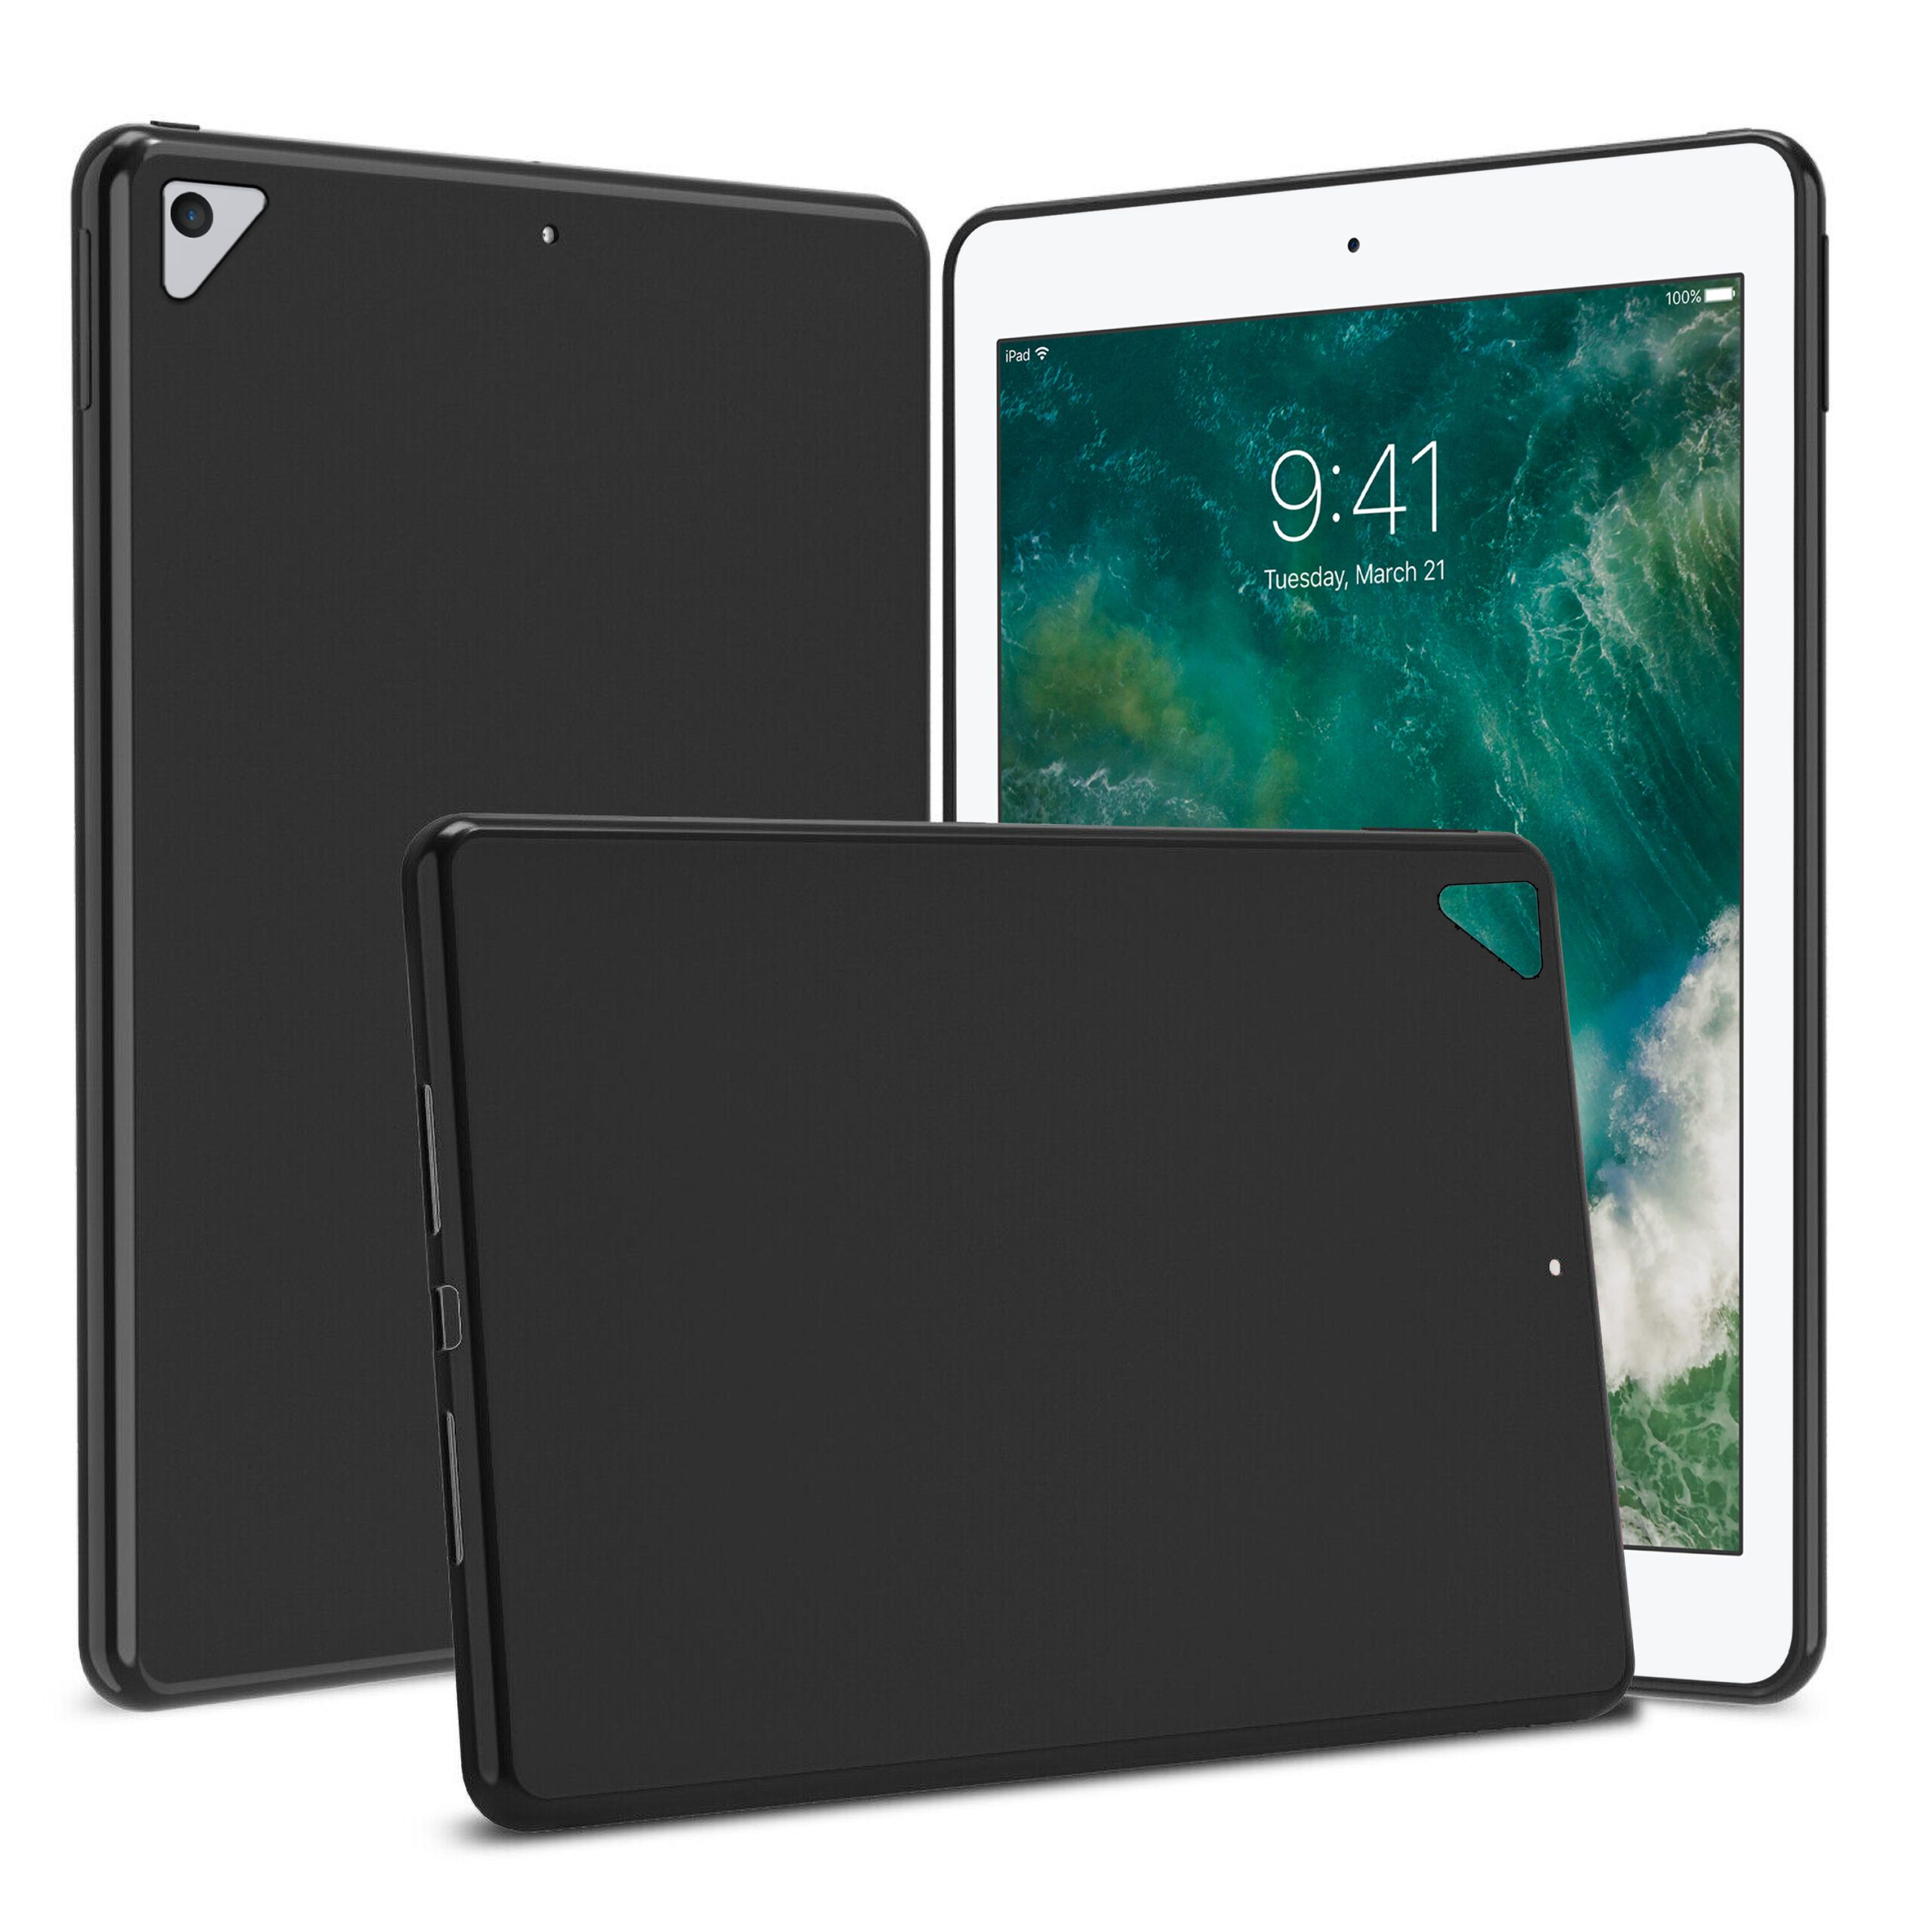 TGK Soft Silicon TPU Back Case Cover for iPad 9.7 inch 5th 6th Gen / Air 2 / Air 1 / Pro 9.7 inch, Black